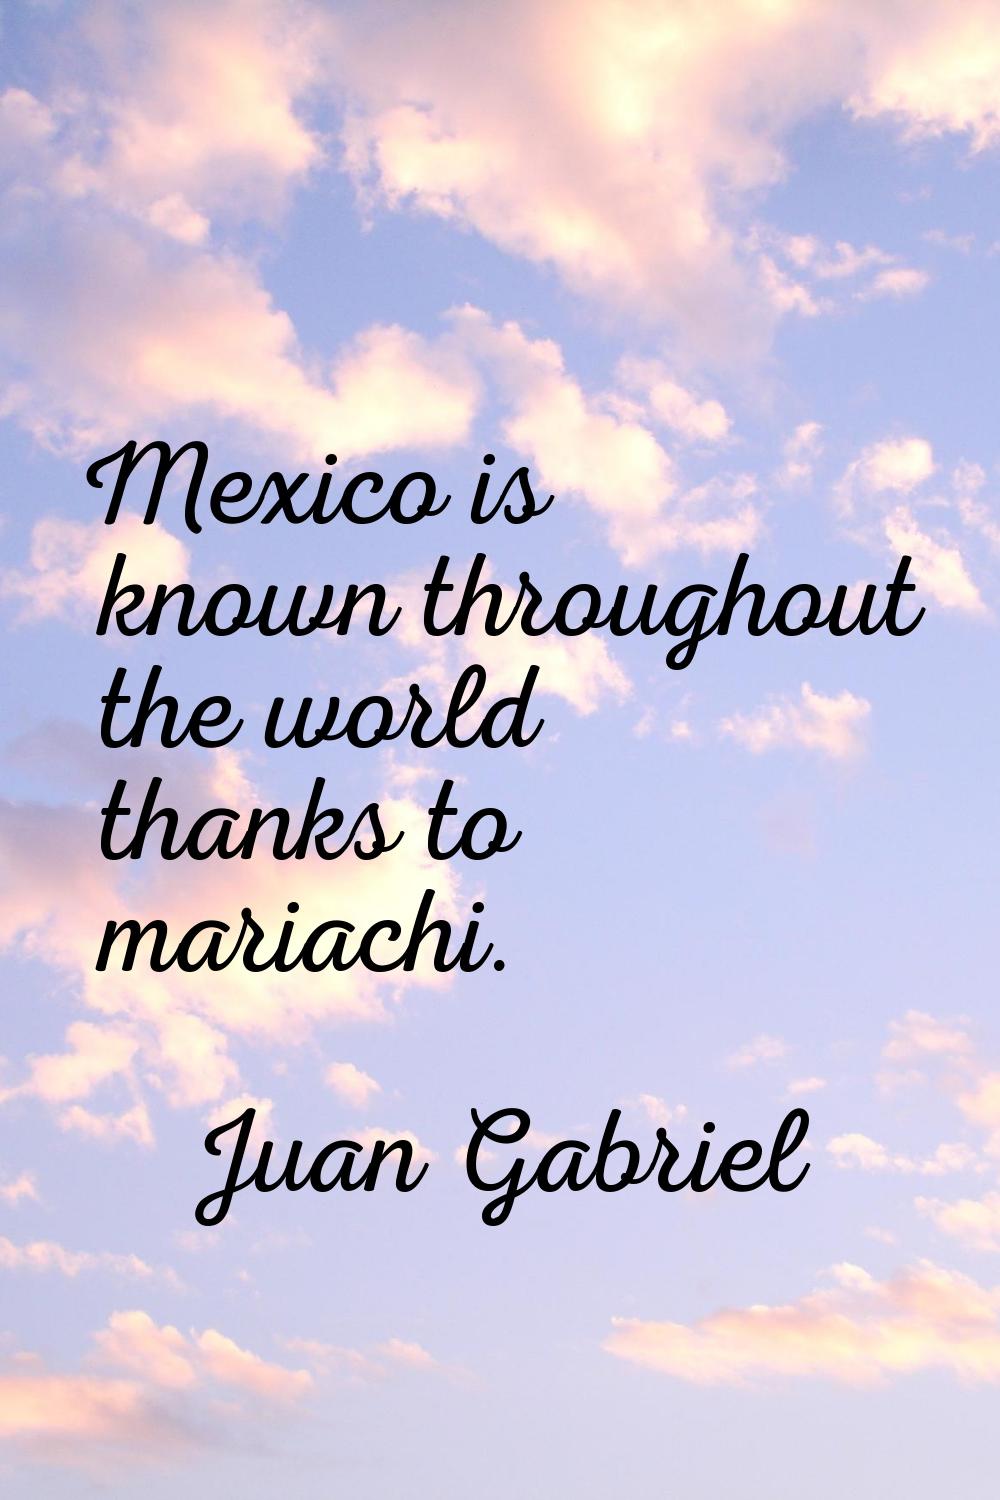 Mexico is known throughout the world thanks to mariachi.